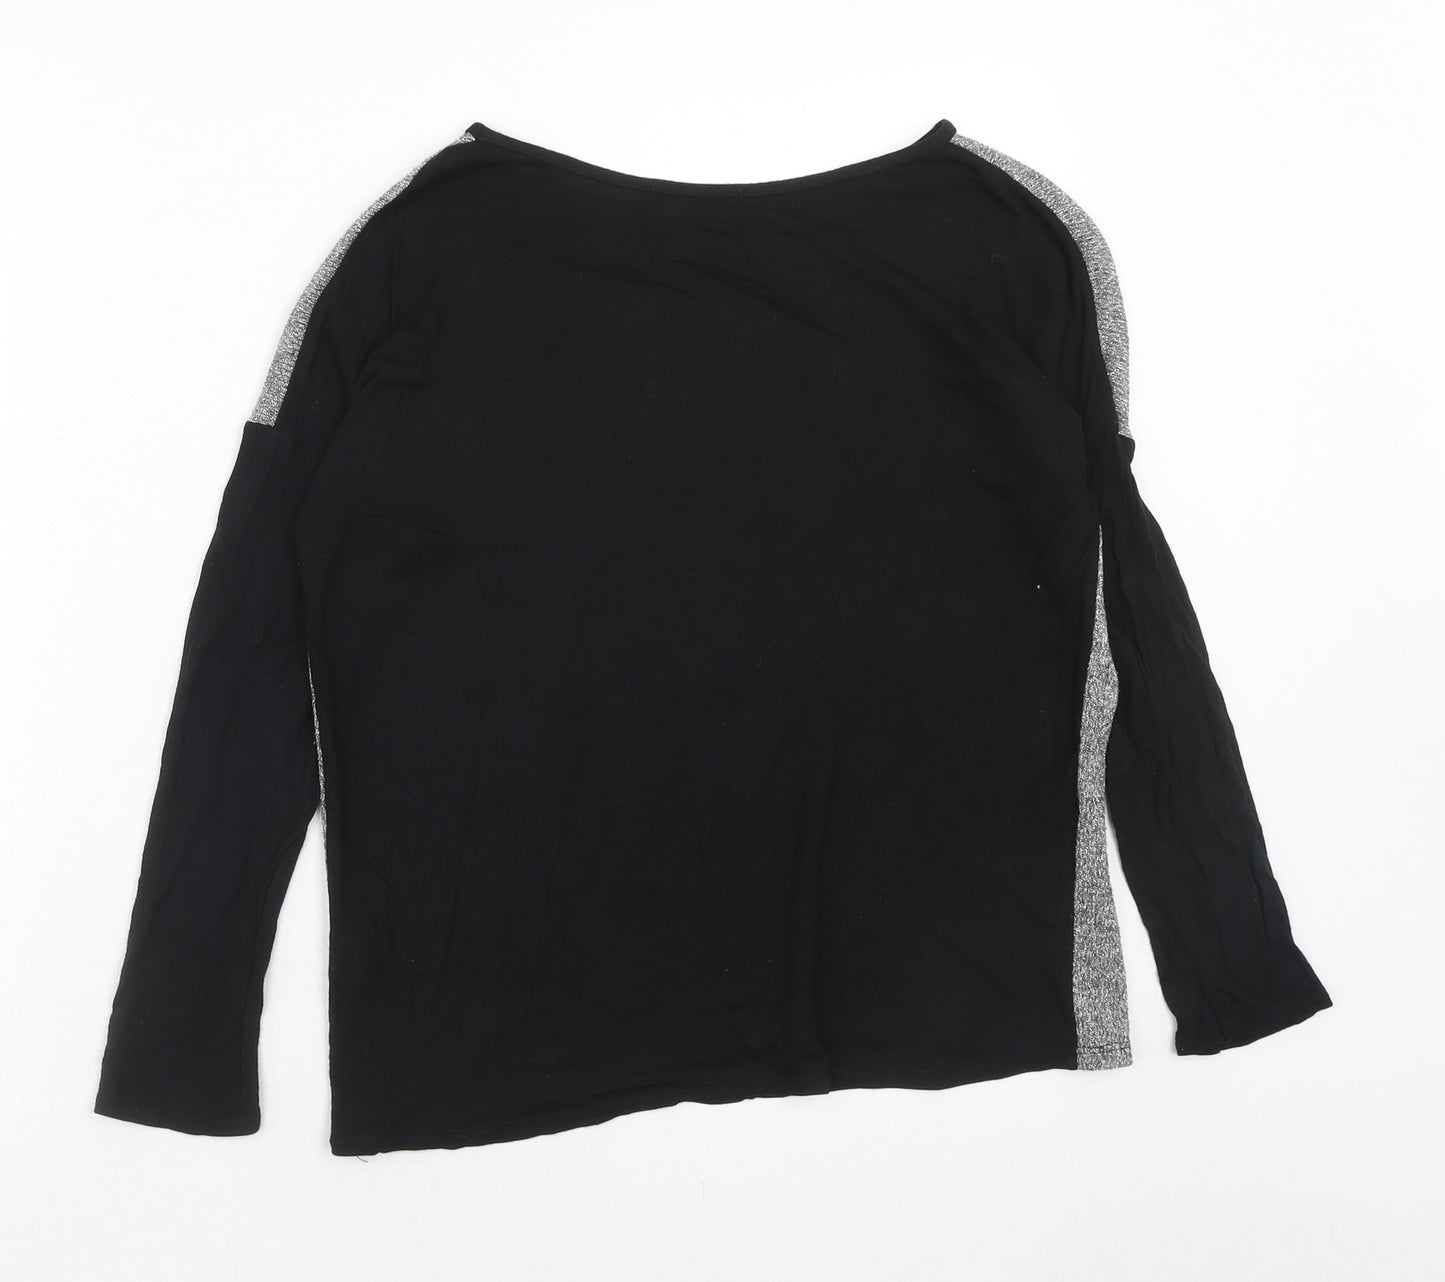 Young Dimension Girls Black Viscose Basic T-Shirt Size 12-13 Years Boat Neck Pullover